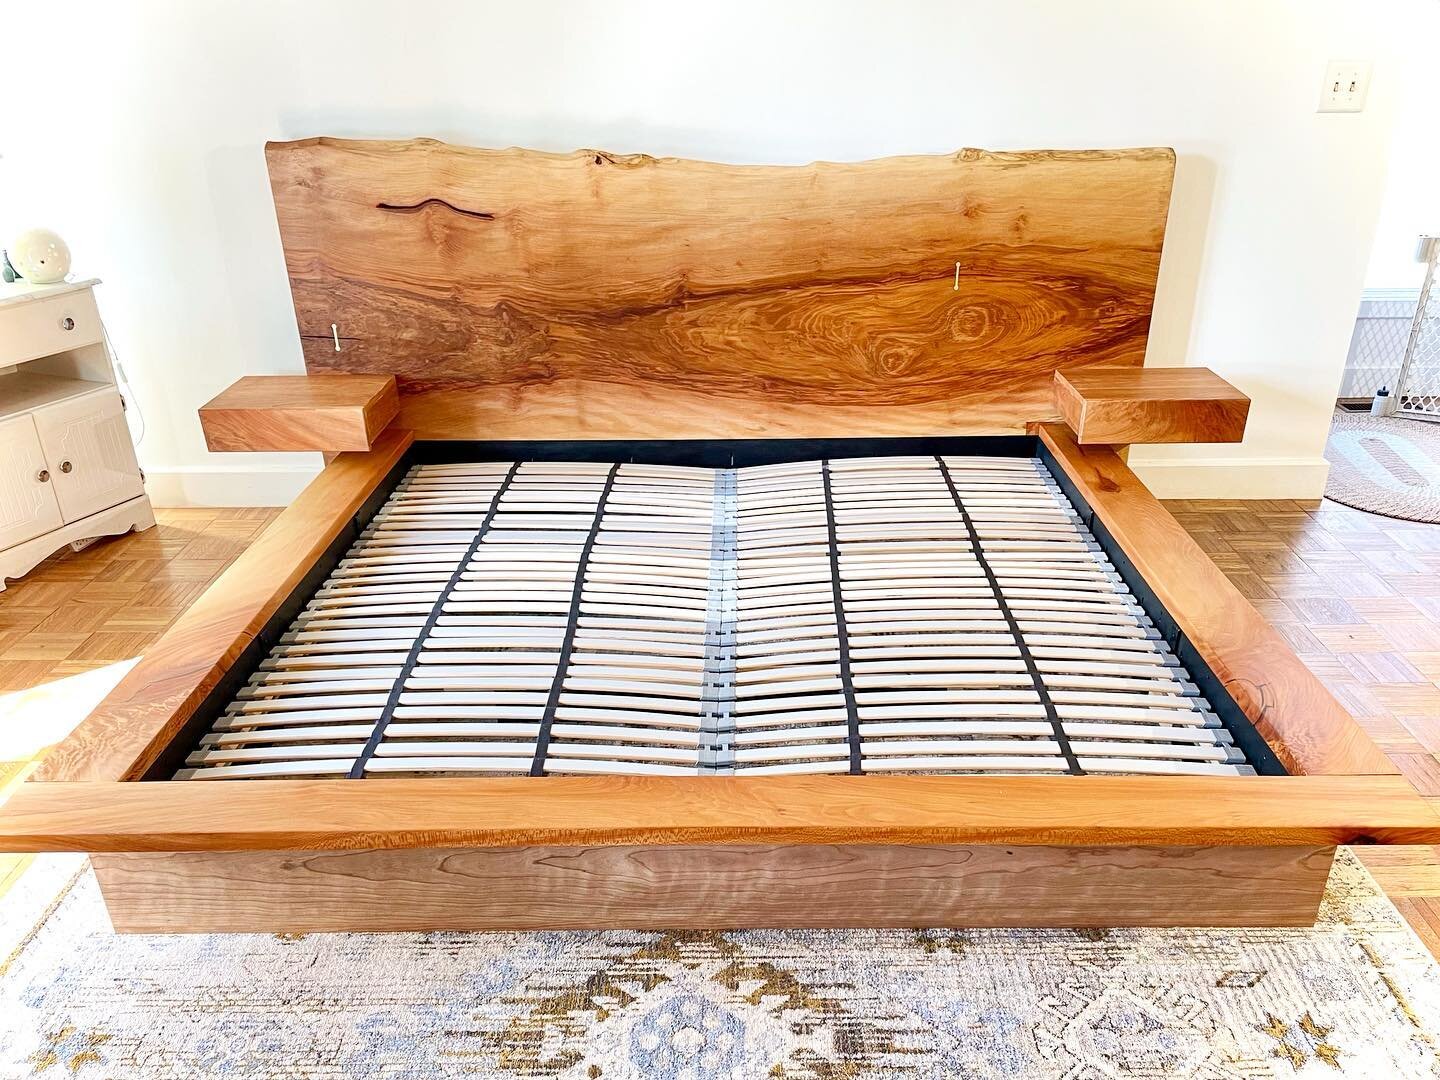 Custom built this king-sized Sycamore bed for a dear client in Austin, TX. The headboard is made with a single Sycamore live edge slab. The bed sides and drawers were made from wood from the same tree for a perfect grain match. Finished in hand rubbe